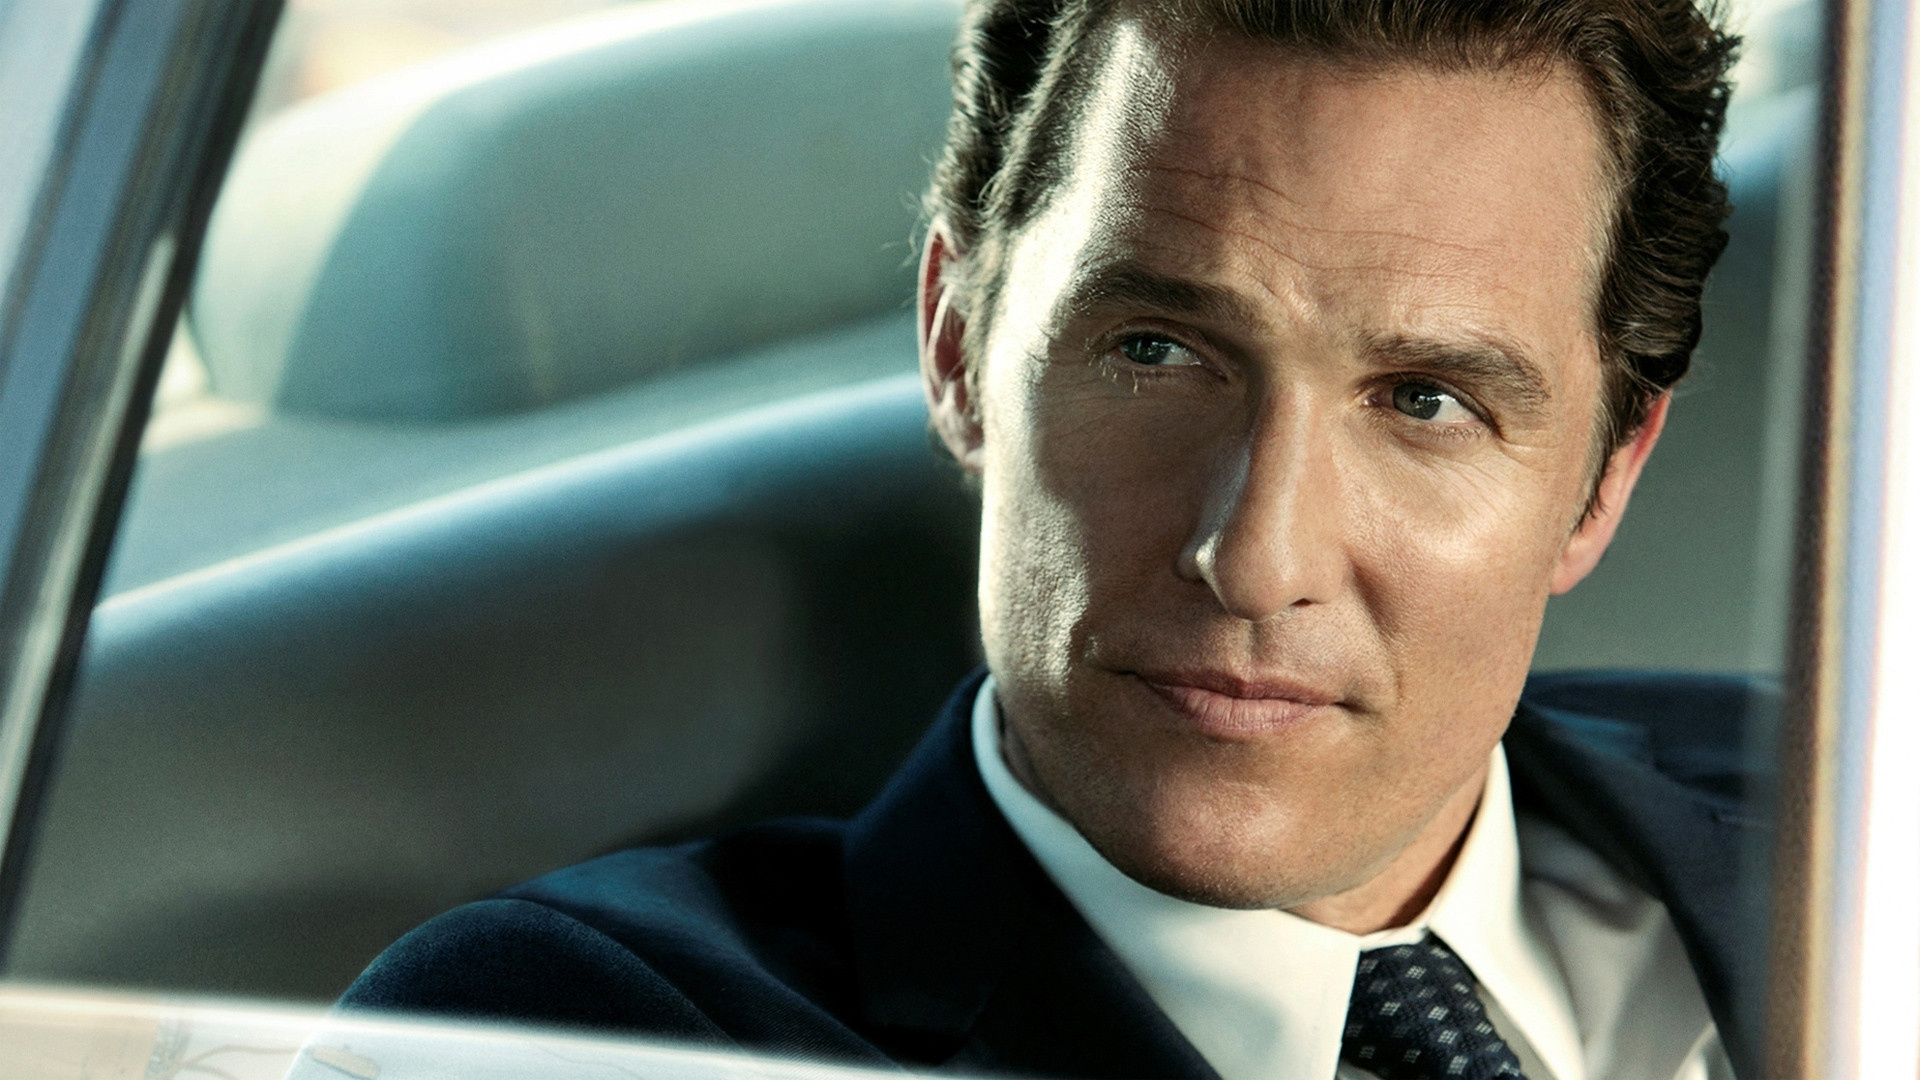 The Lincoln Lawyer: Mickey Haller, who works in a chauffeur-driven Lincoln Town Car rather than an office. 1920x1080 Full HD Wallpaper.